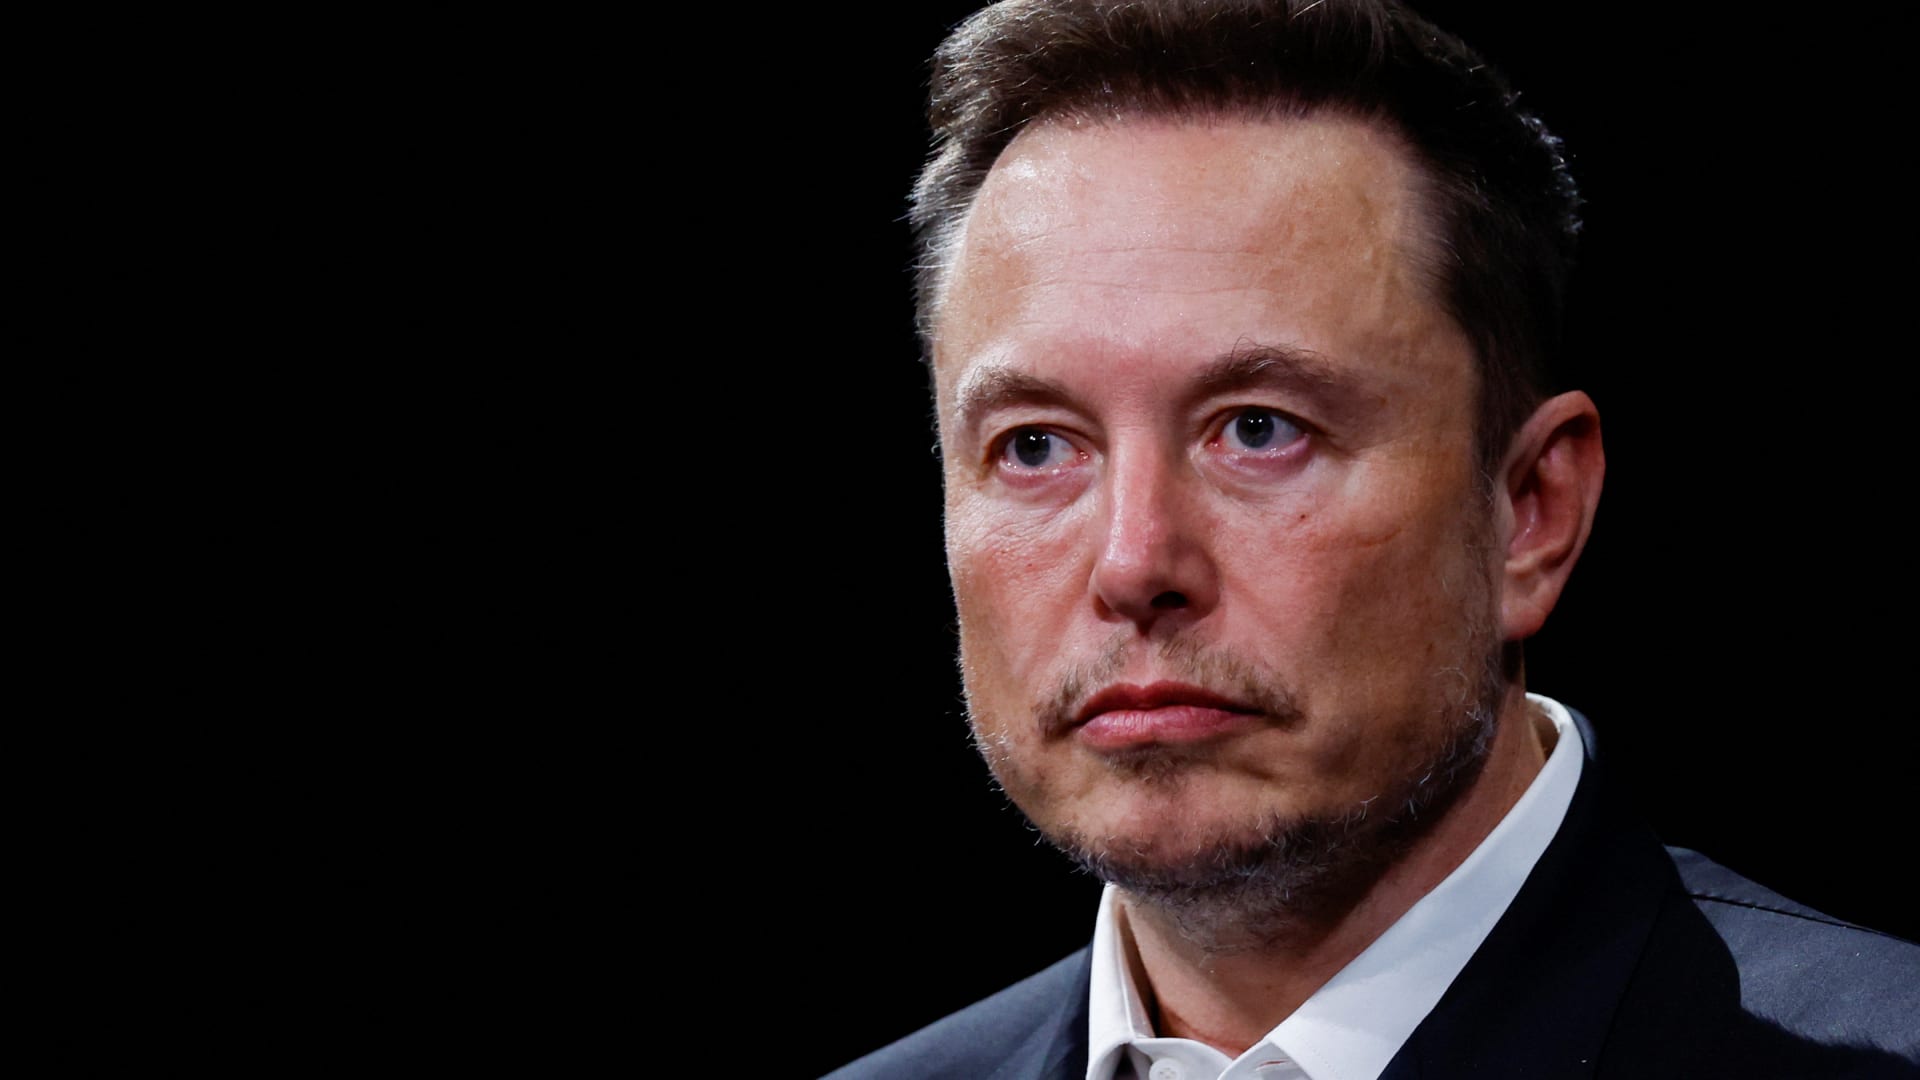 Tesla stock ends the week down 15%, the worst performance of the year